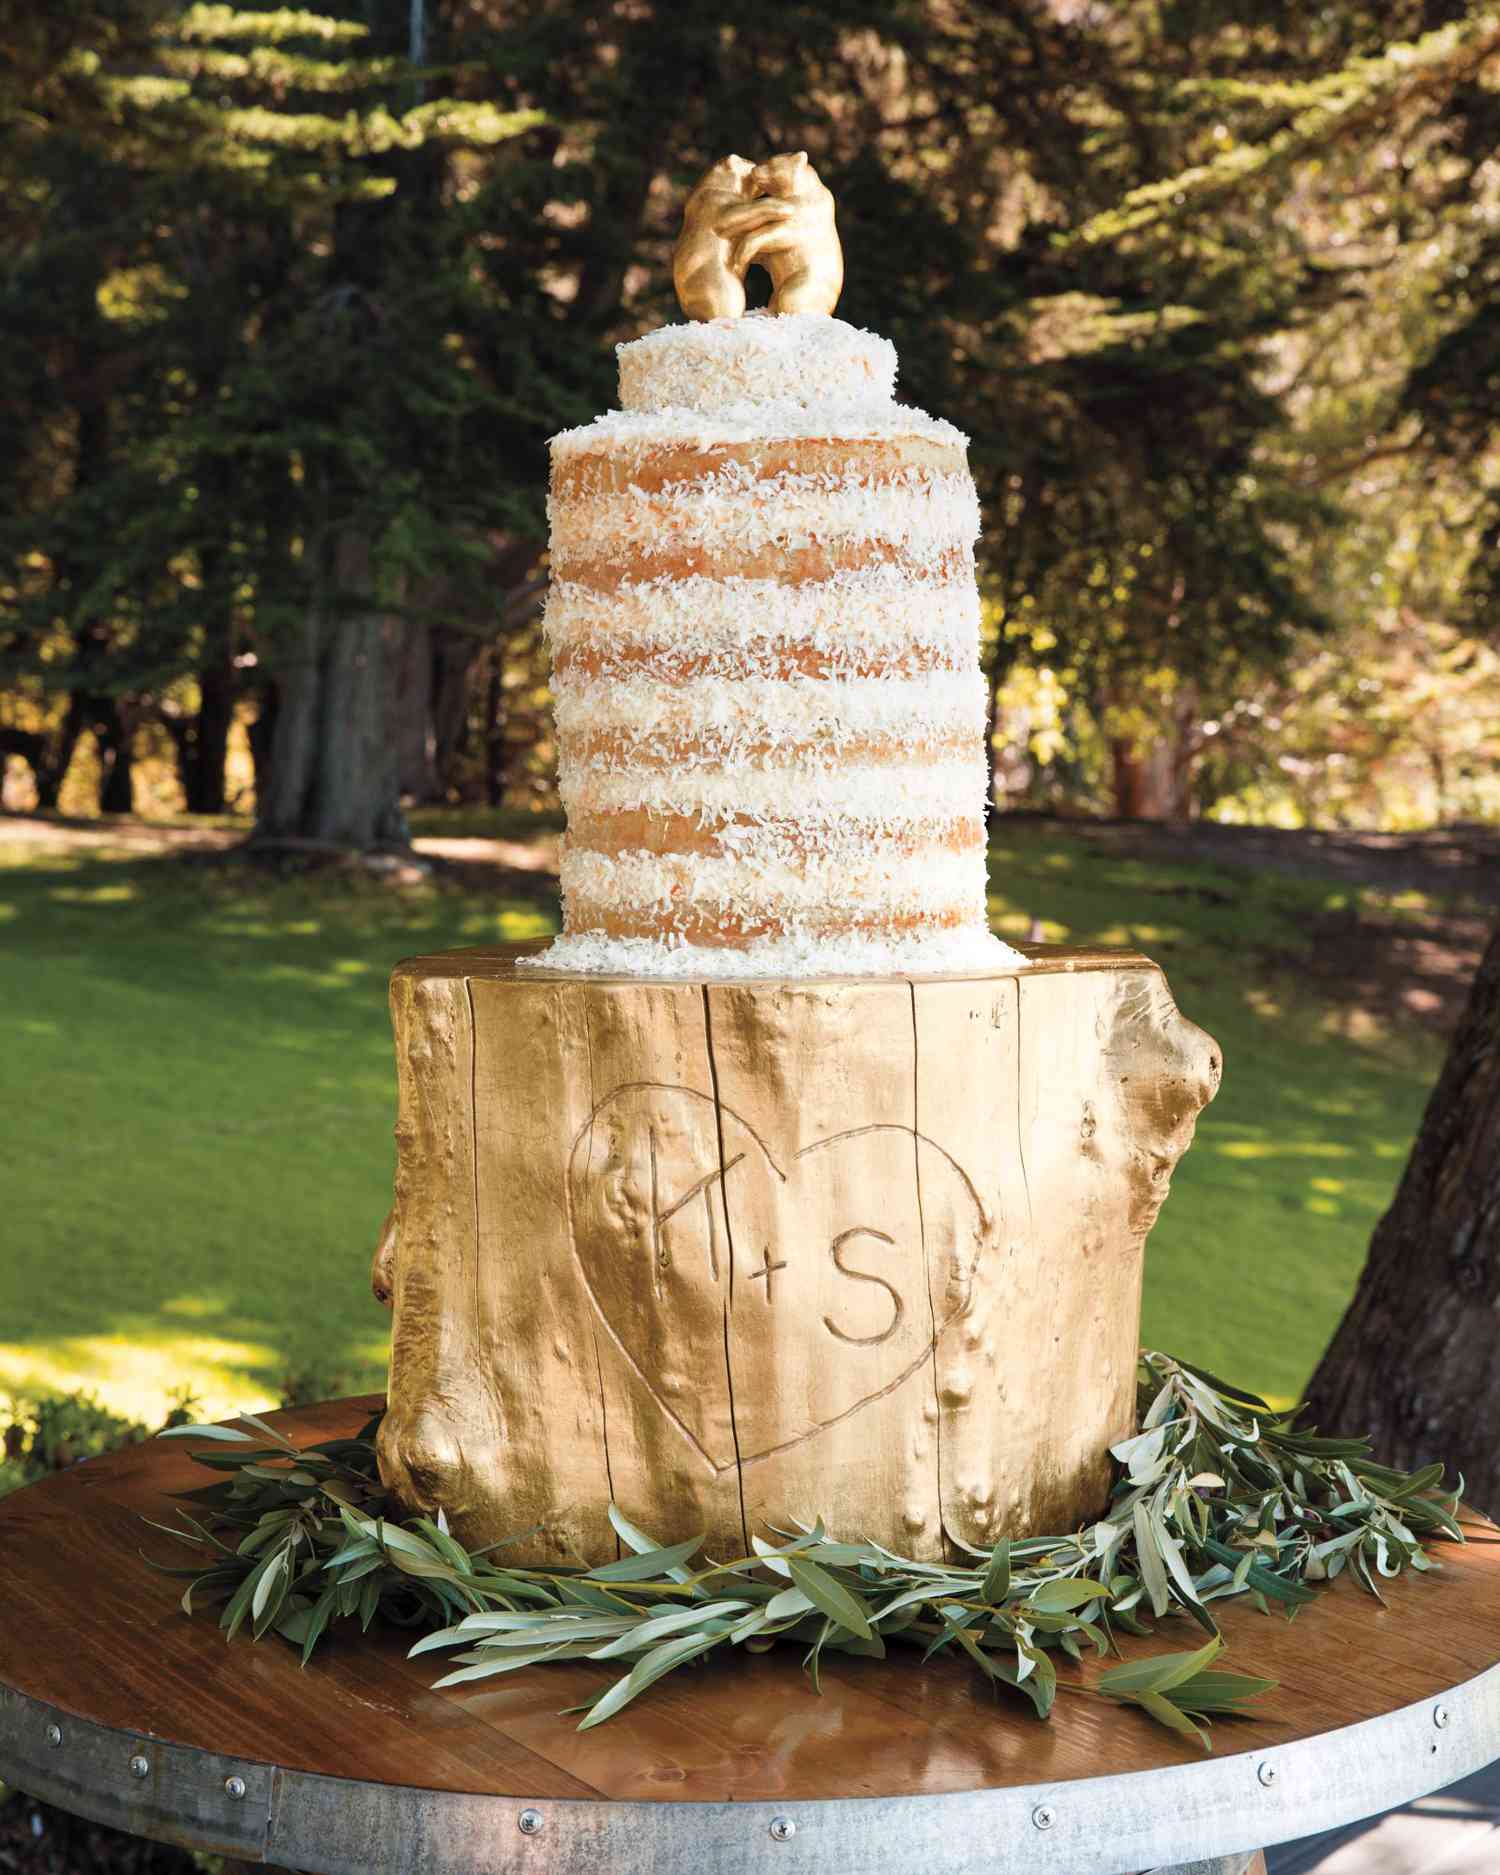 <p>The cream cheese&ndash;frosted coconut cake was topped by dancing bears&mdash;the first thing Sarah bought for the wedding&mdash;that the baker gilded with 18-karat gold leaf. It was placed on a "cake stand" (now a side table in the newlyweds' home) that the baker's boyfriend fashioned from a fallen Monterey Pine.</p>
                            